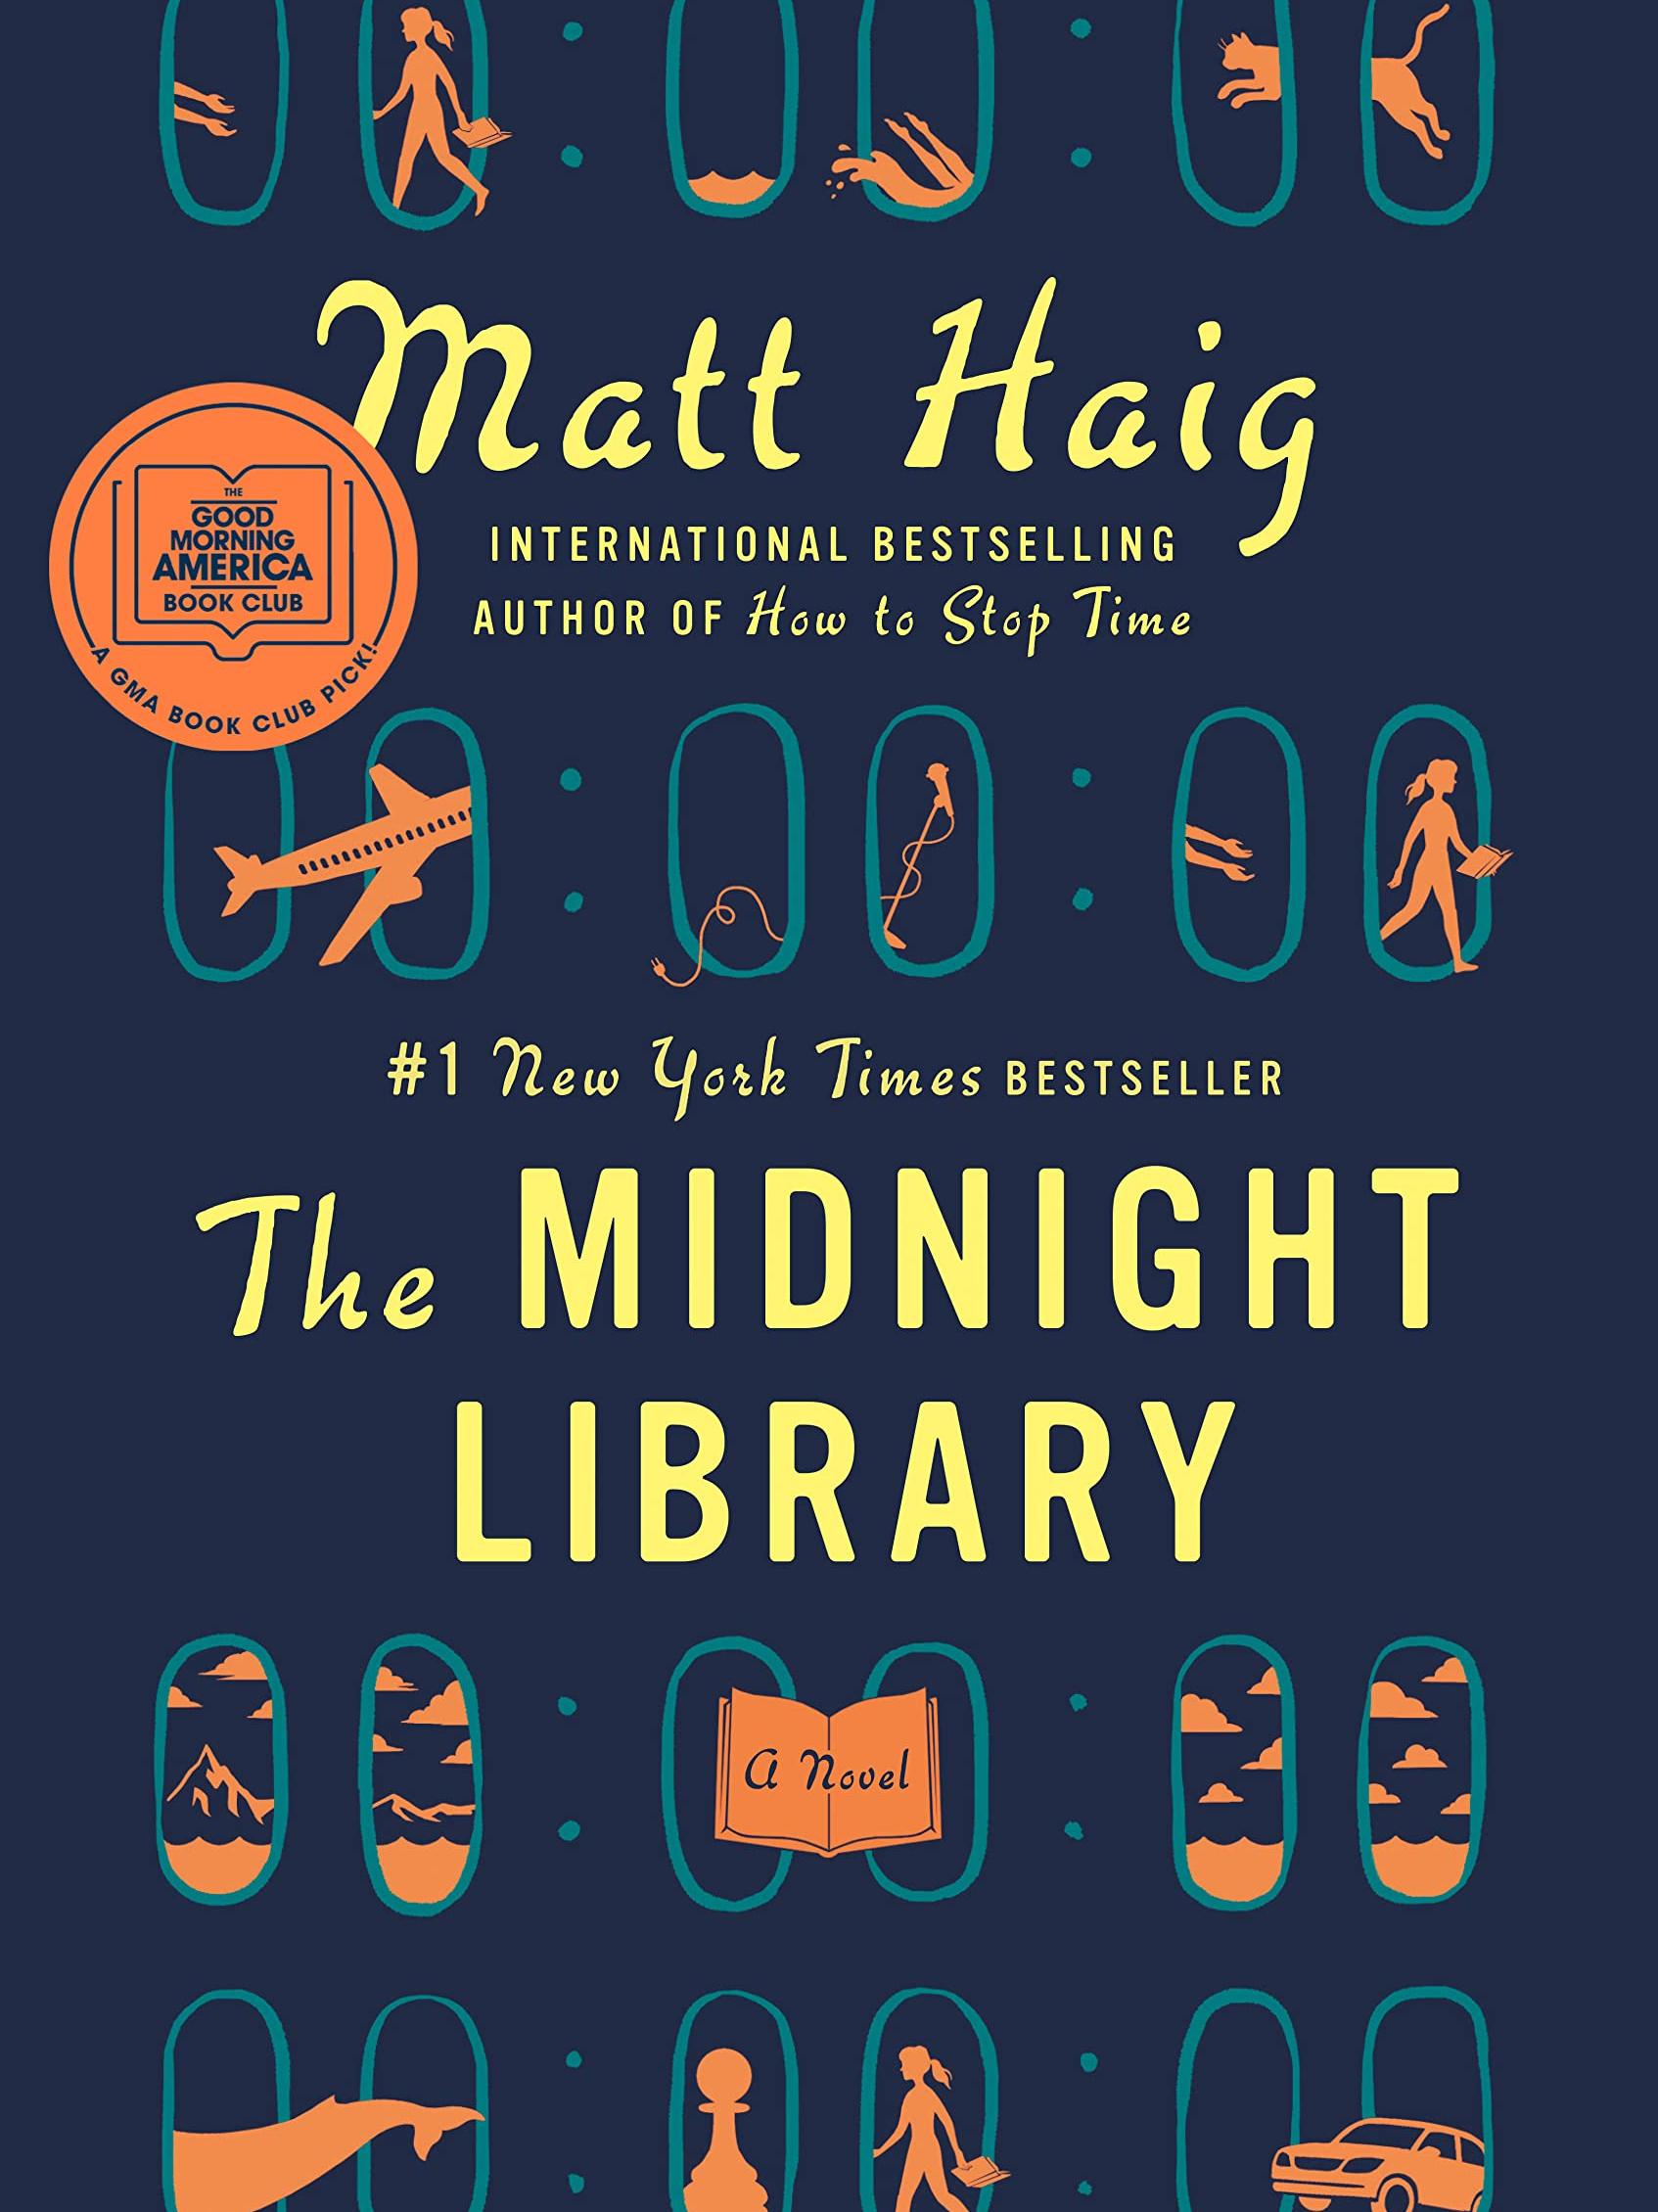 Book Discussion: The Midnight Library Dec 15th, 6:30pm